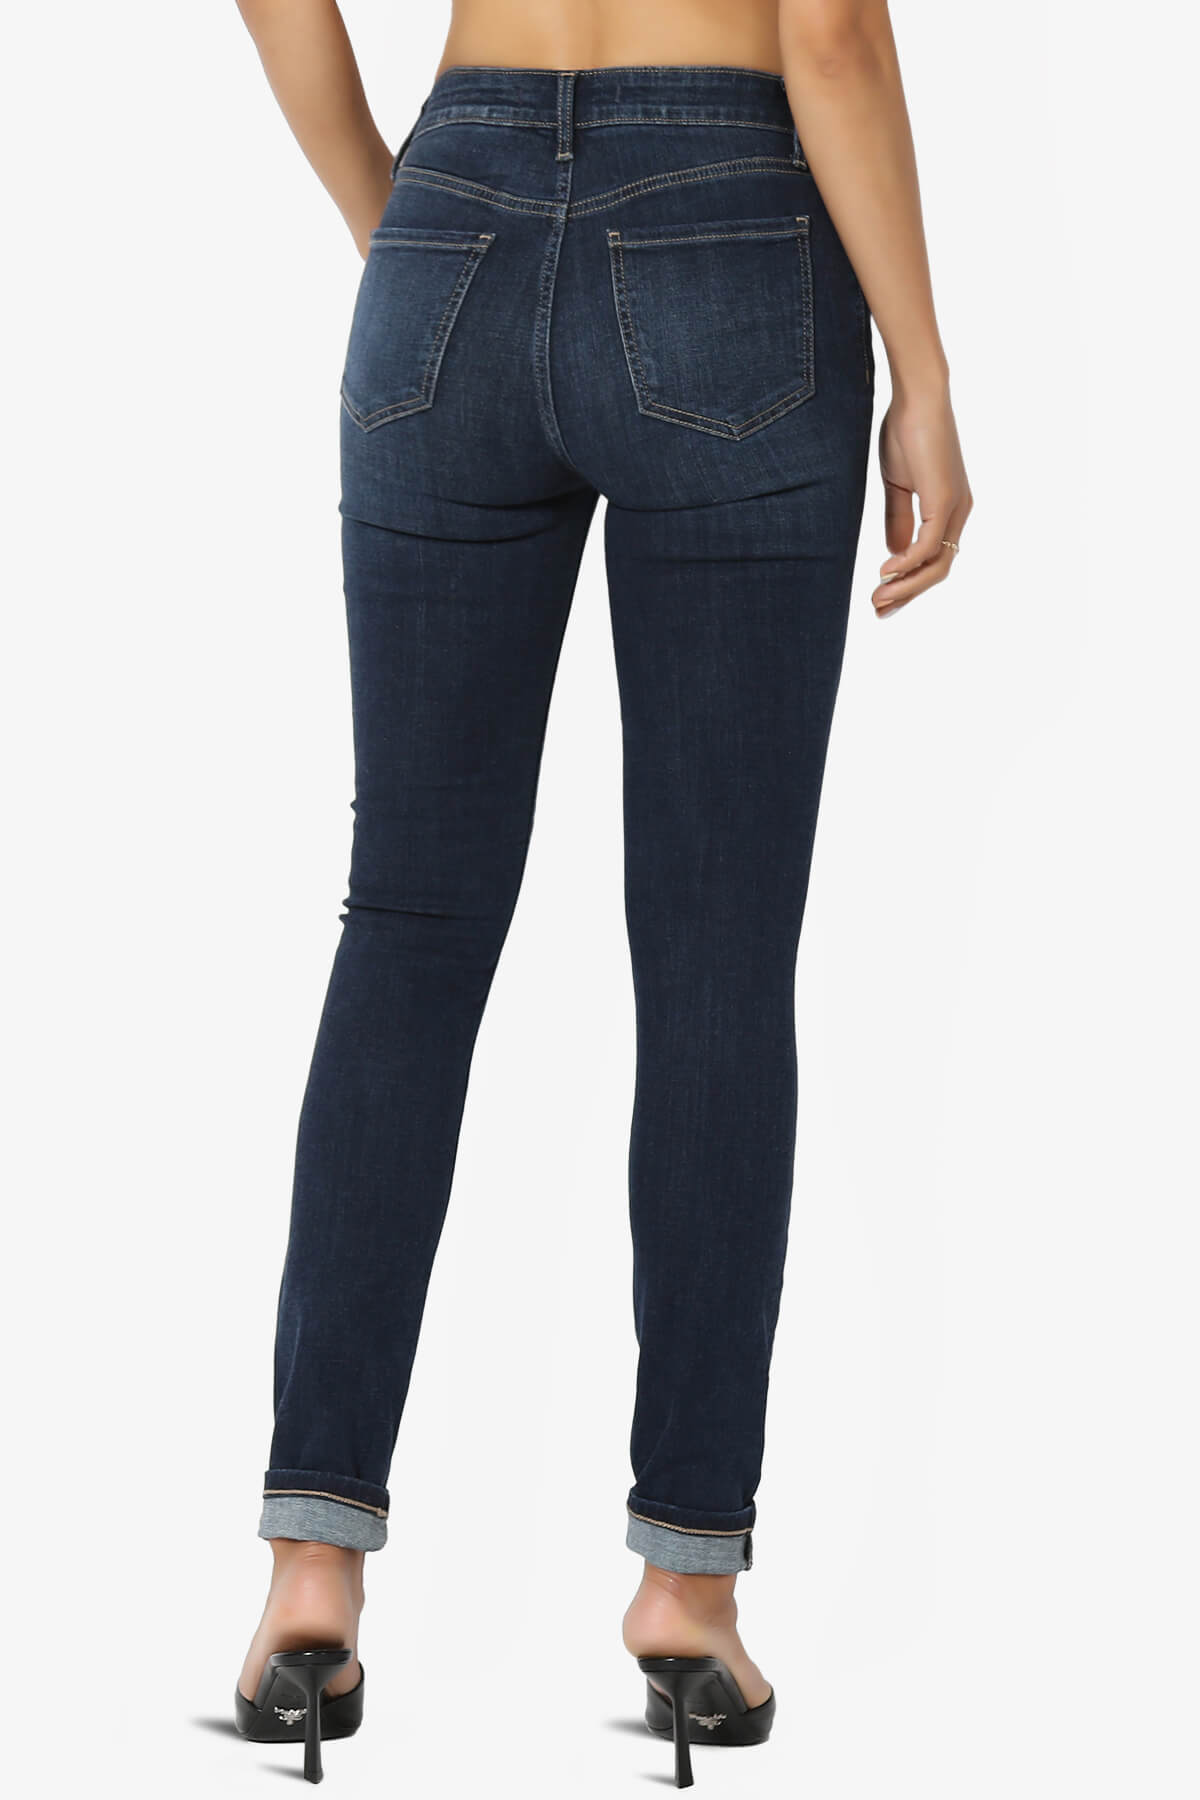 Load image into Gallery viewer, Jude Mid Rise Ankle Skinny Jeans in Bseat DARK_2
